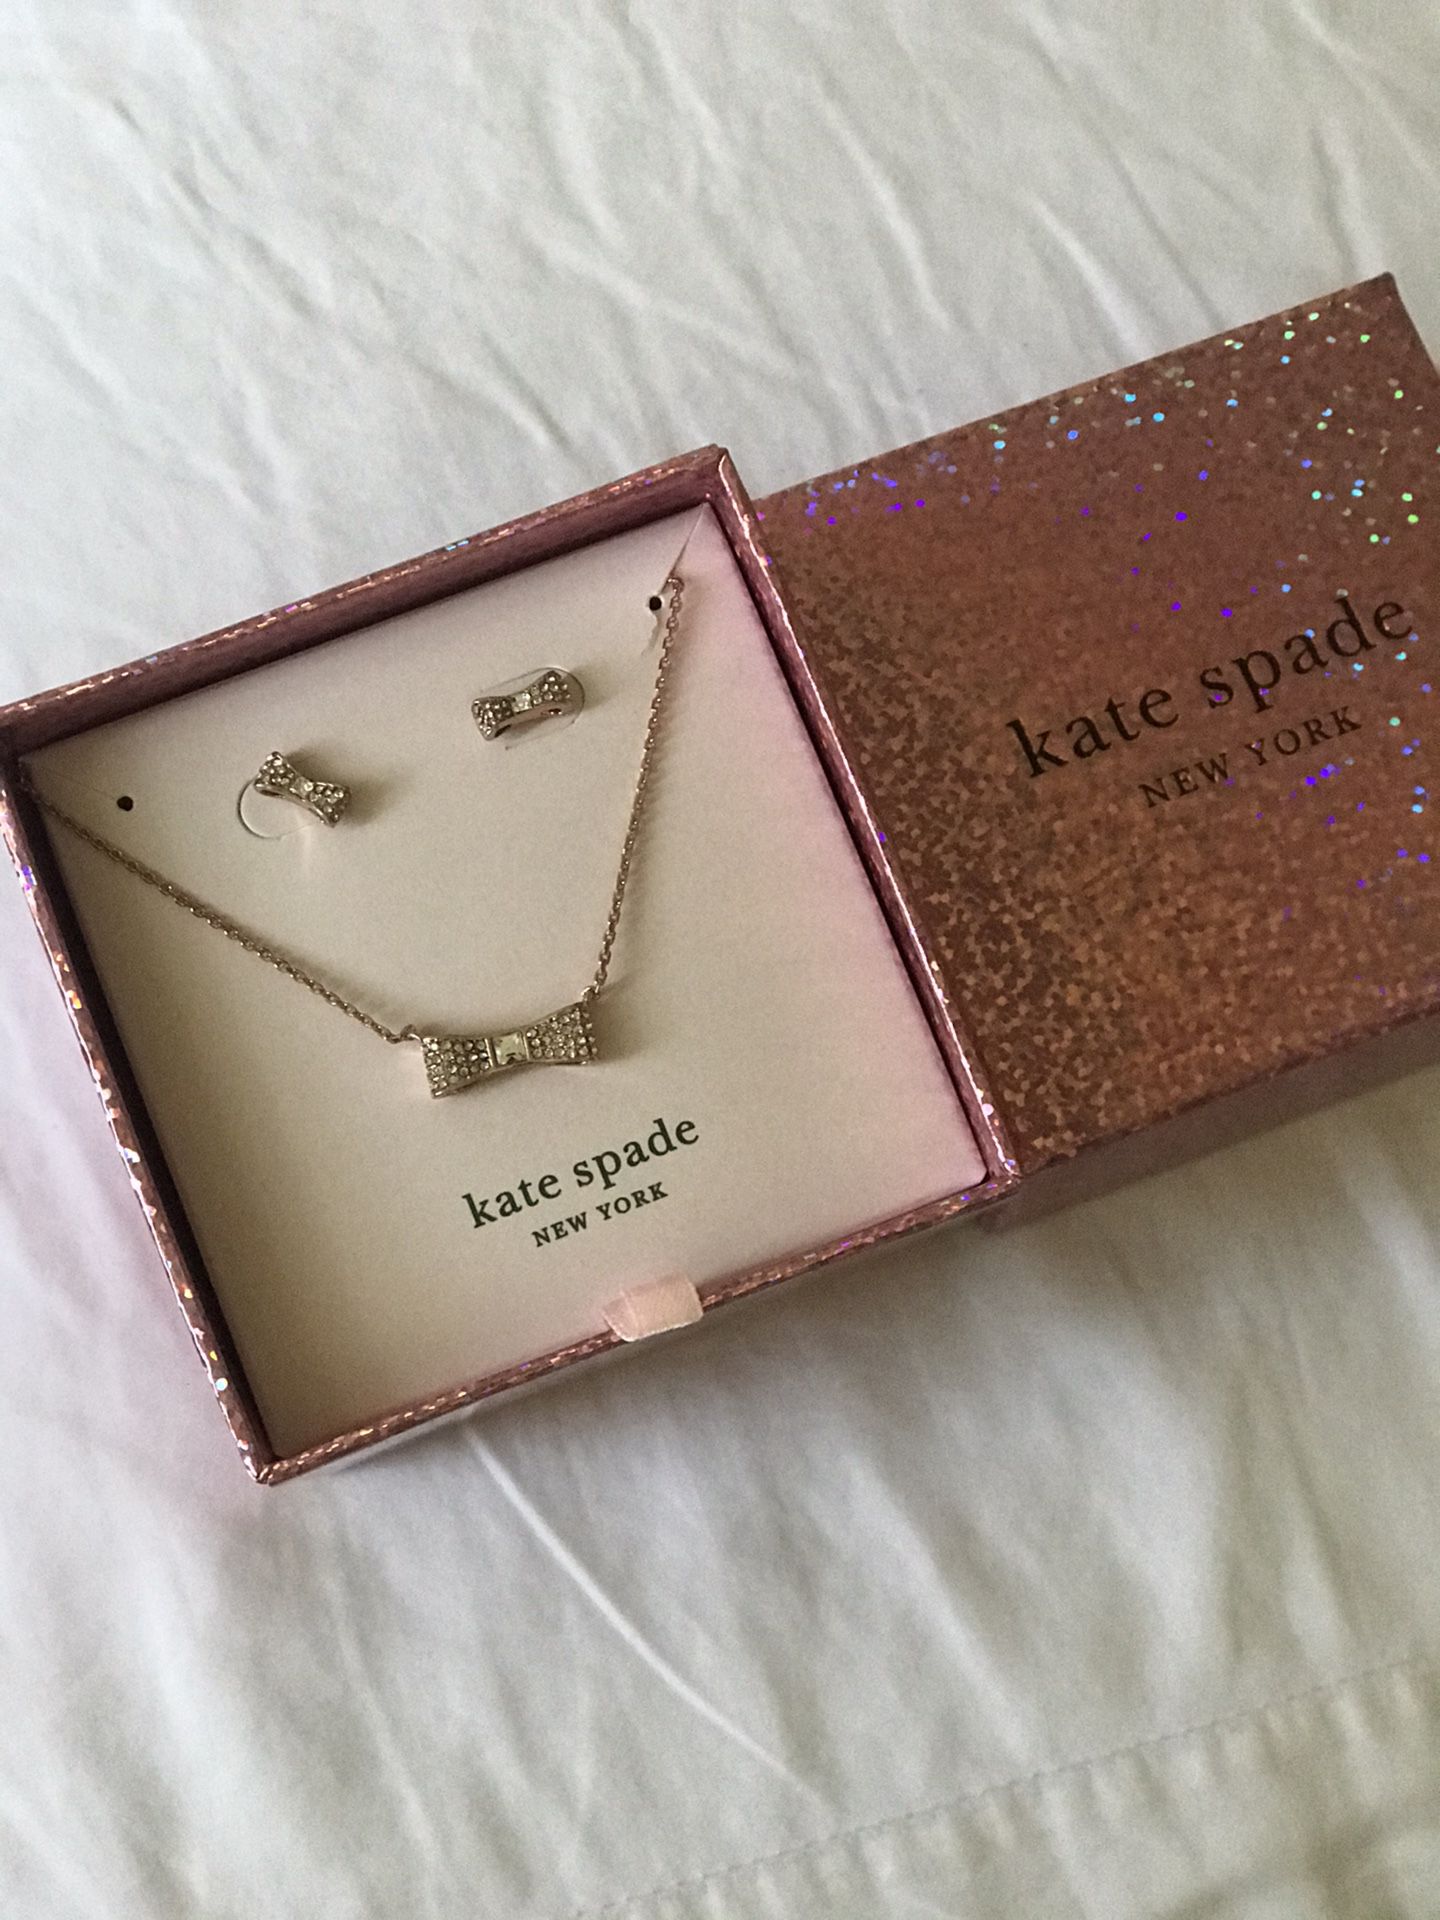 Kate spade bow earring and necklace set